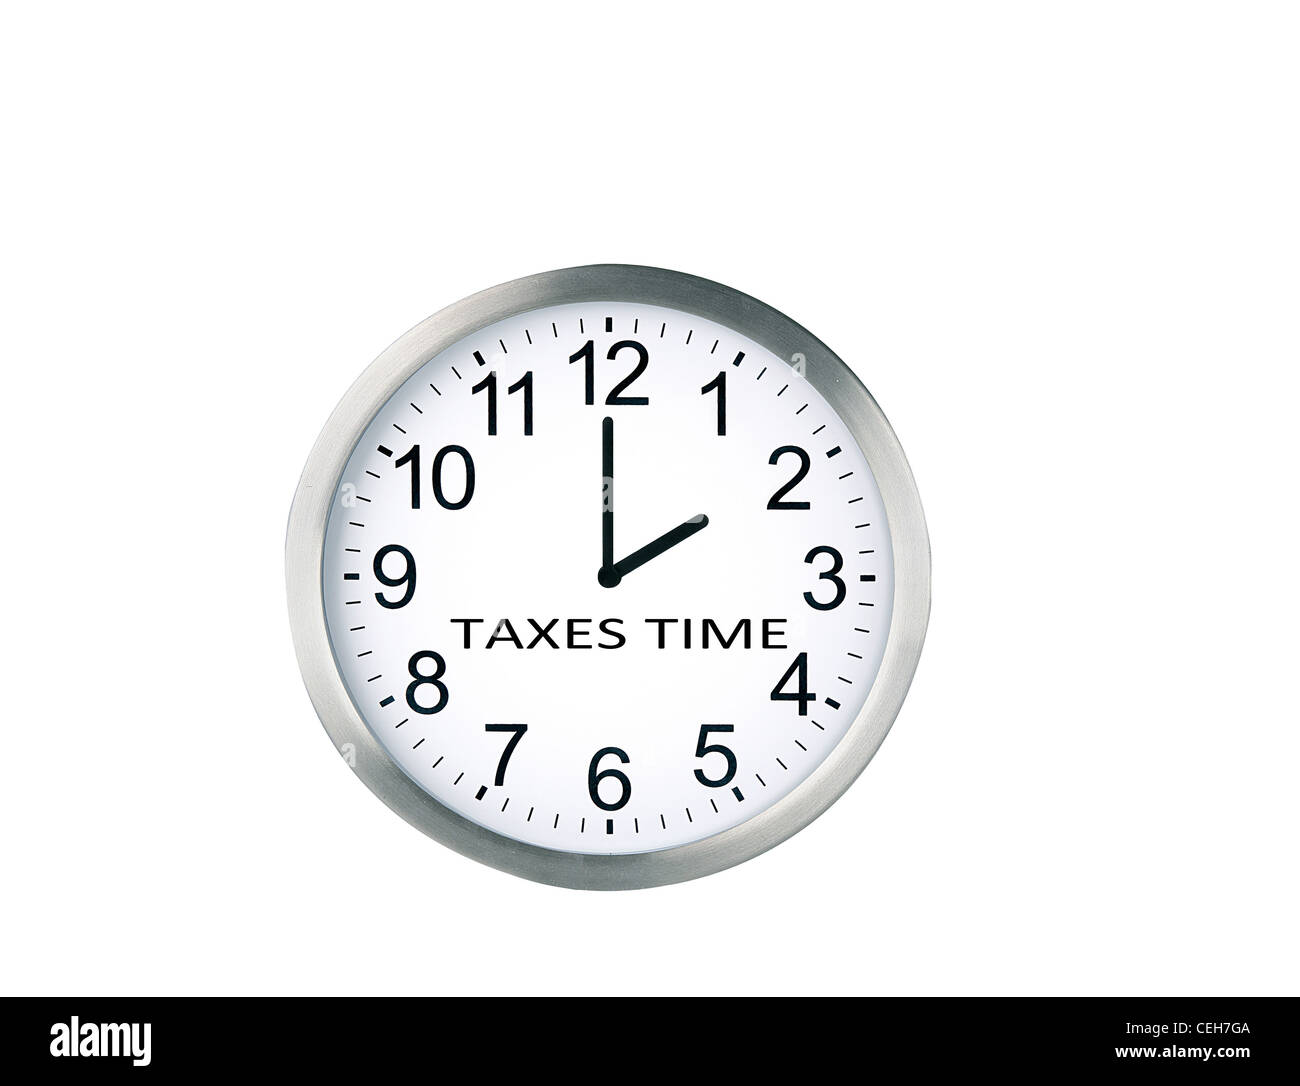 It is time to do the taxes. Stock Photo